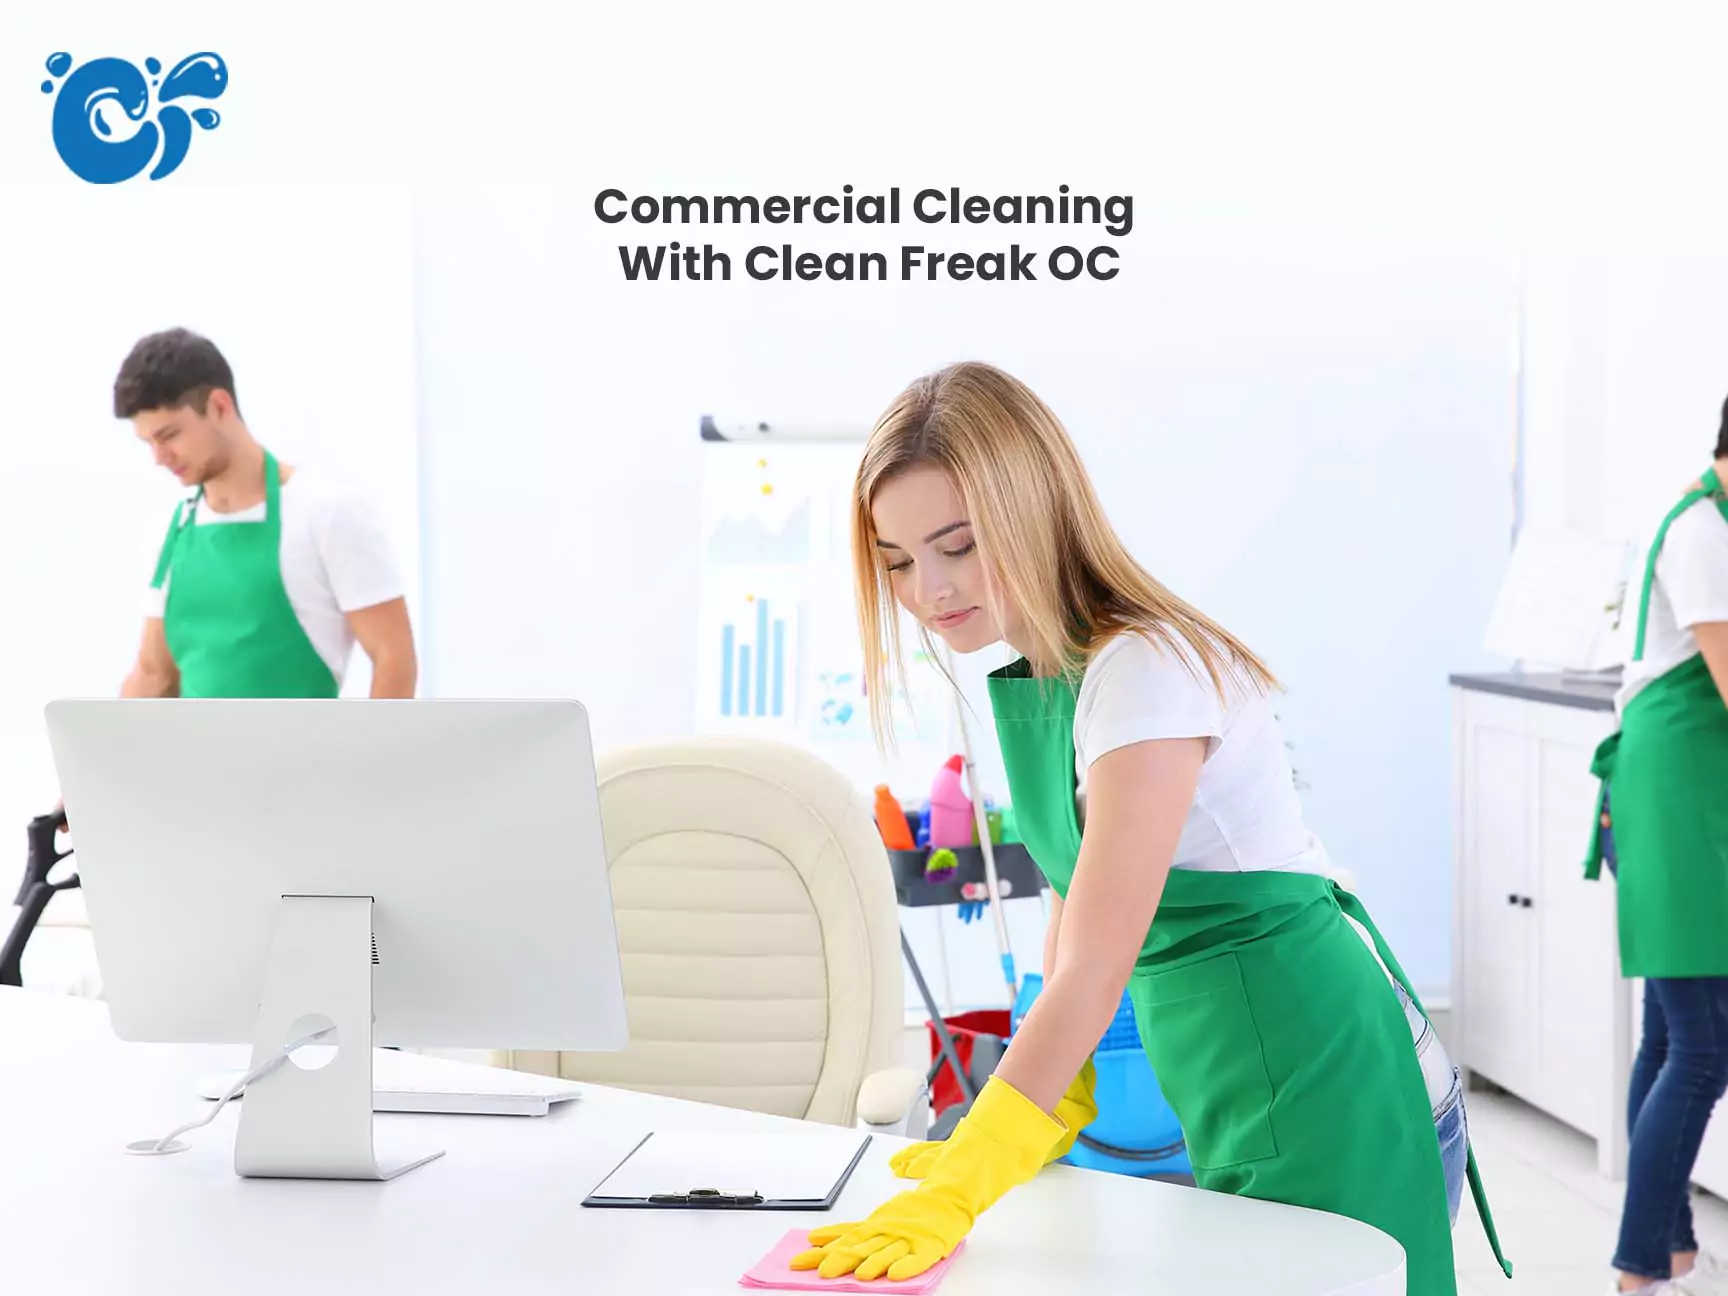 Commercial Cleaning With Clean Freak OC